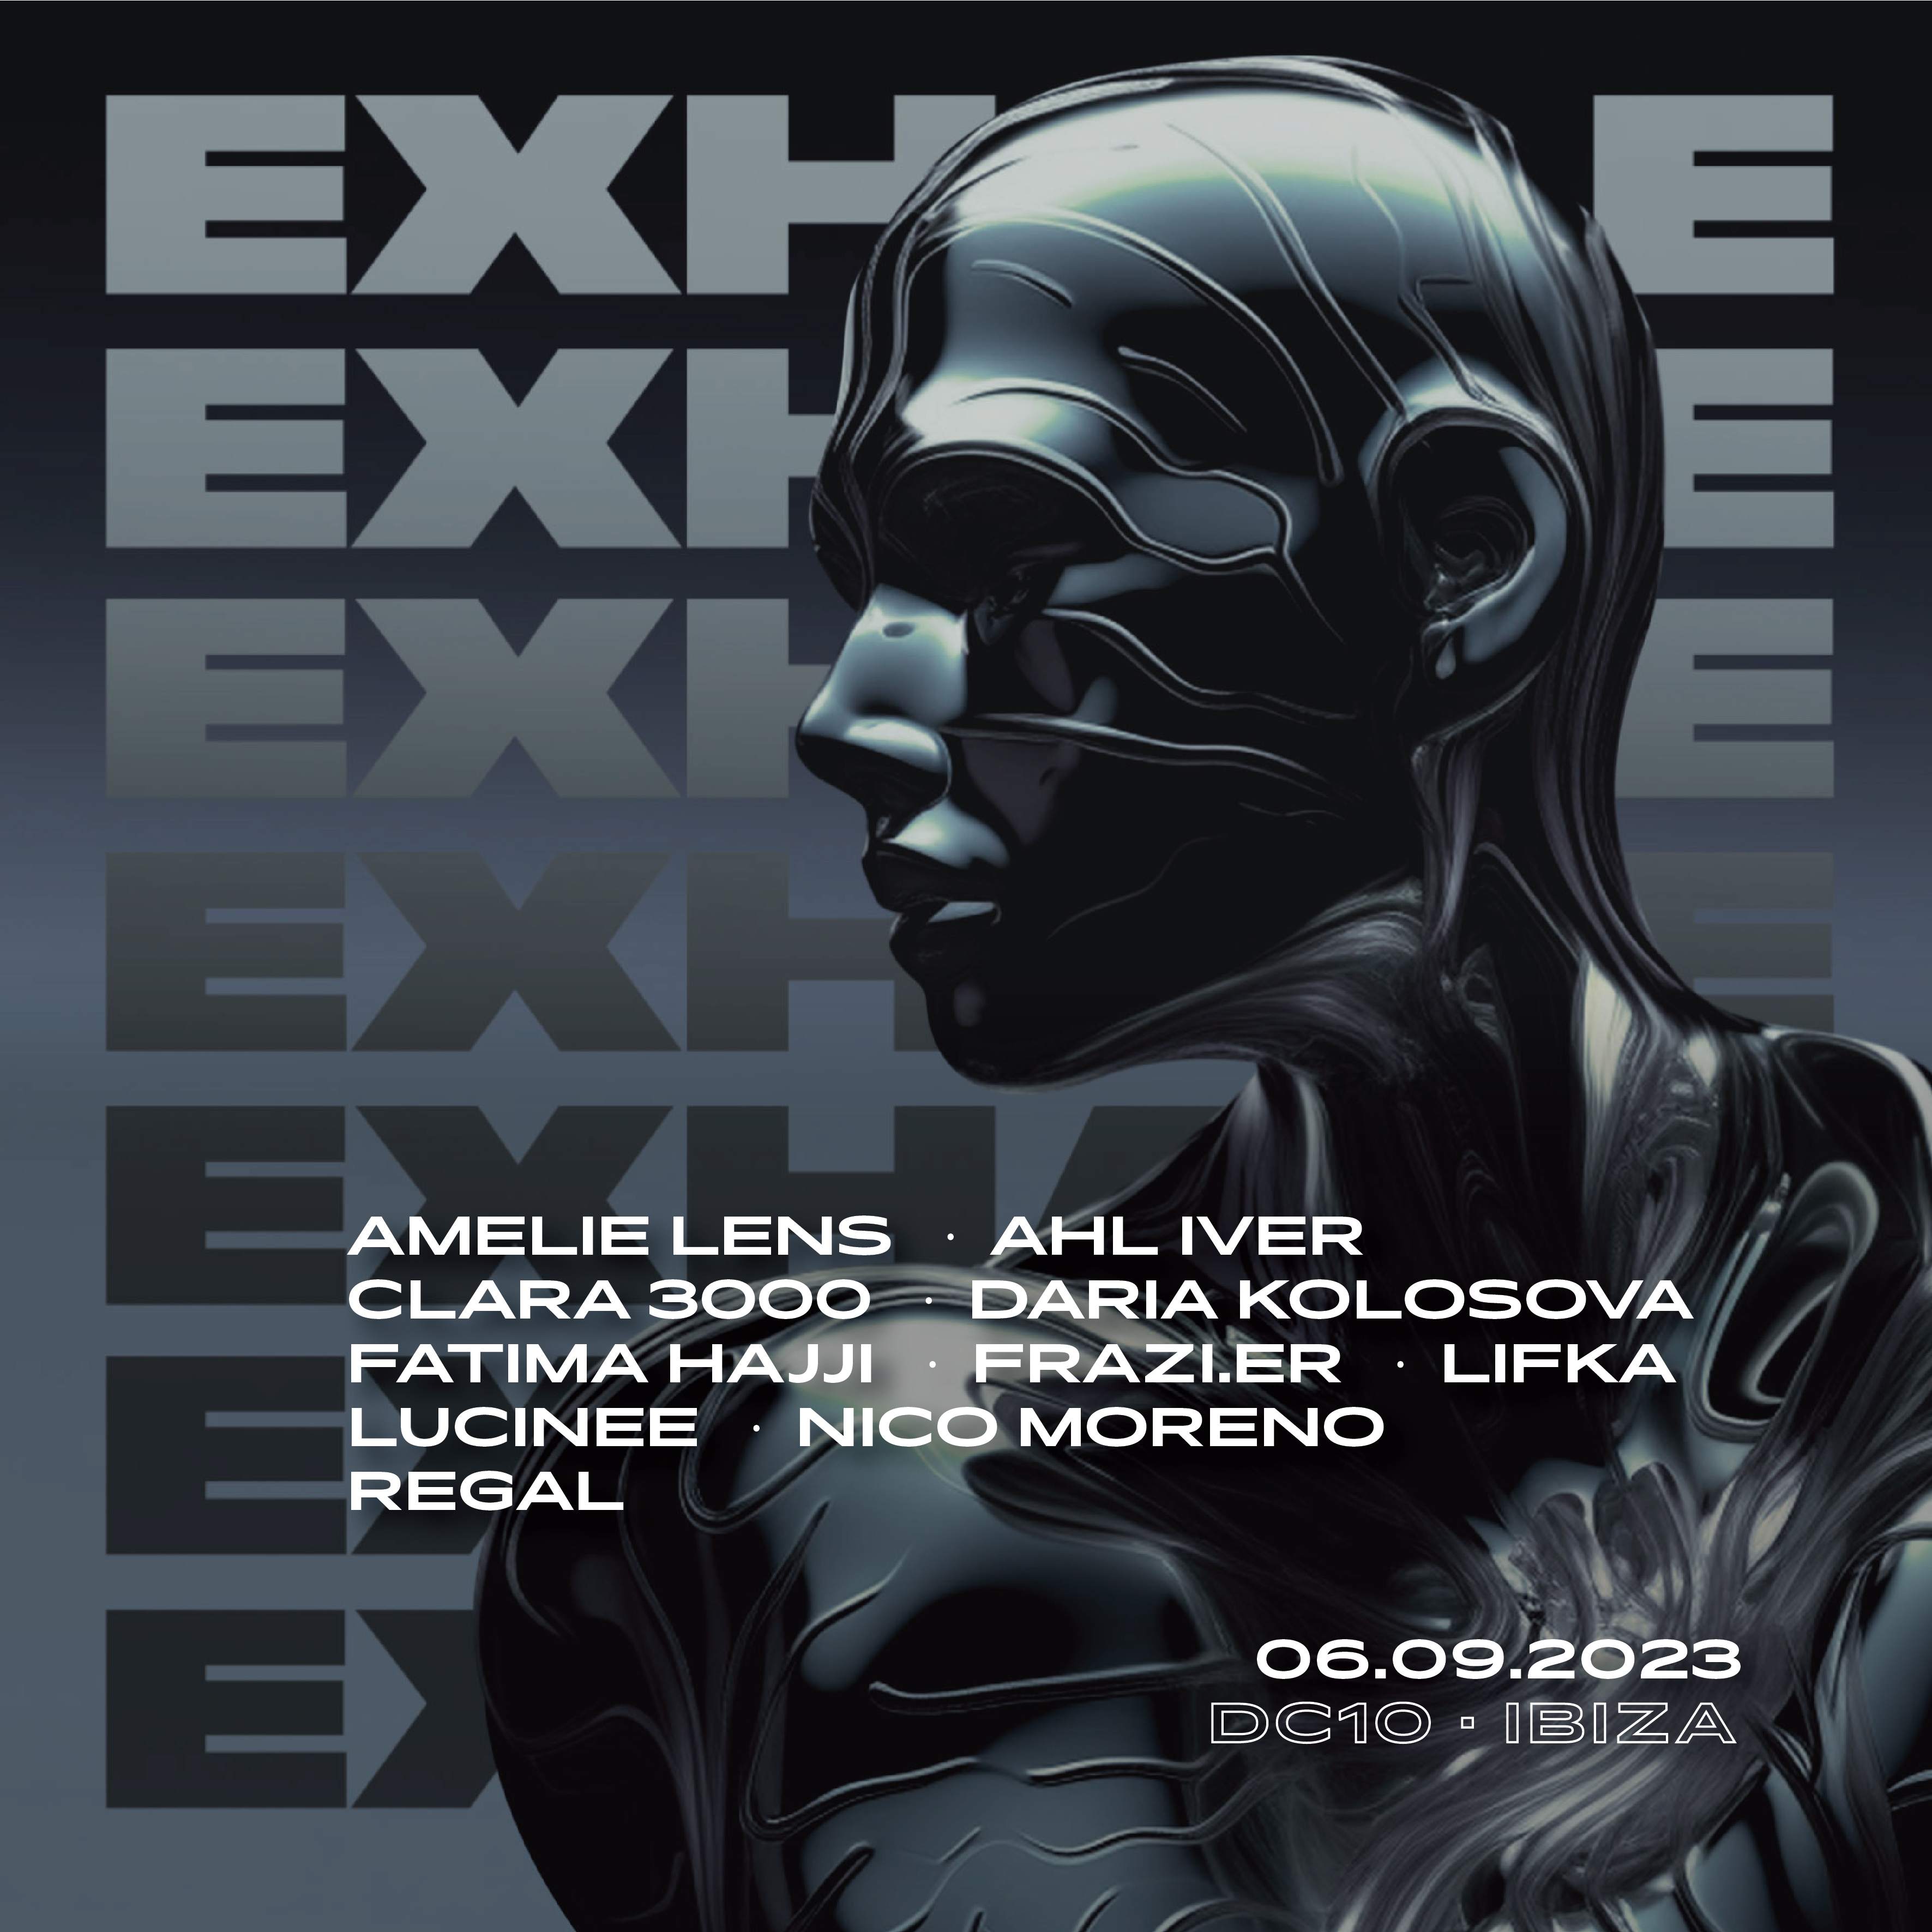 EXHALE x DC-10 WK 7 with Amelie Lens, Ahl Iver, Clara 3000, Daria Kolosova and more - フライヤー表